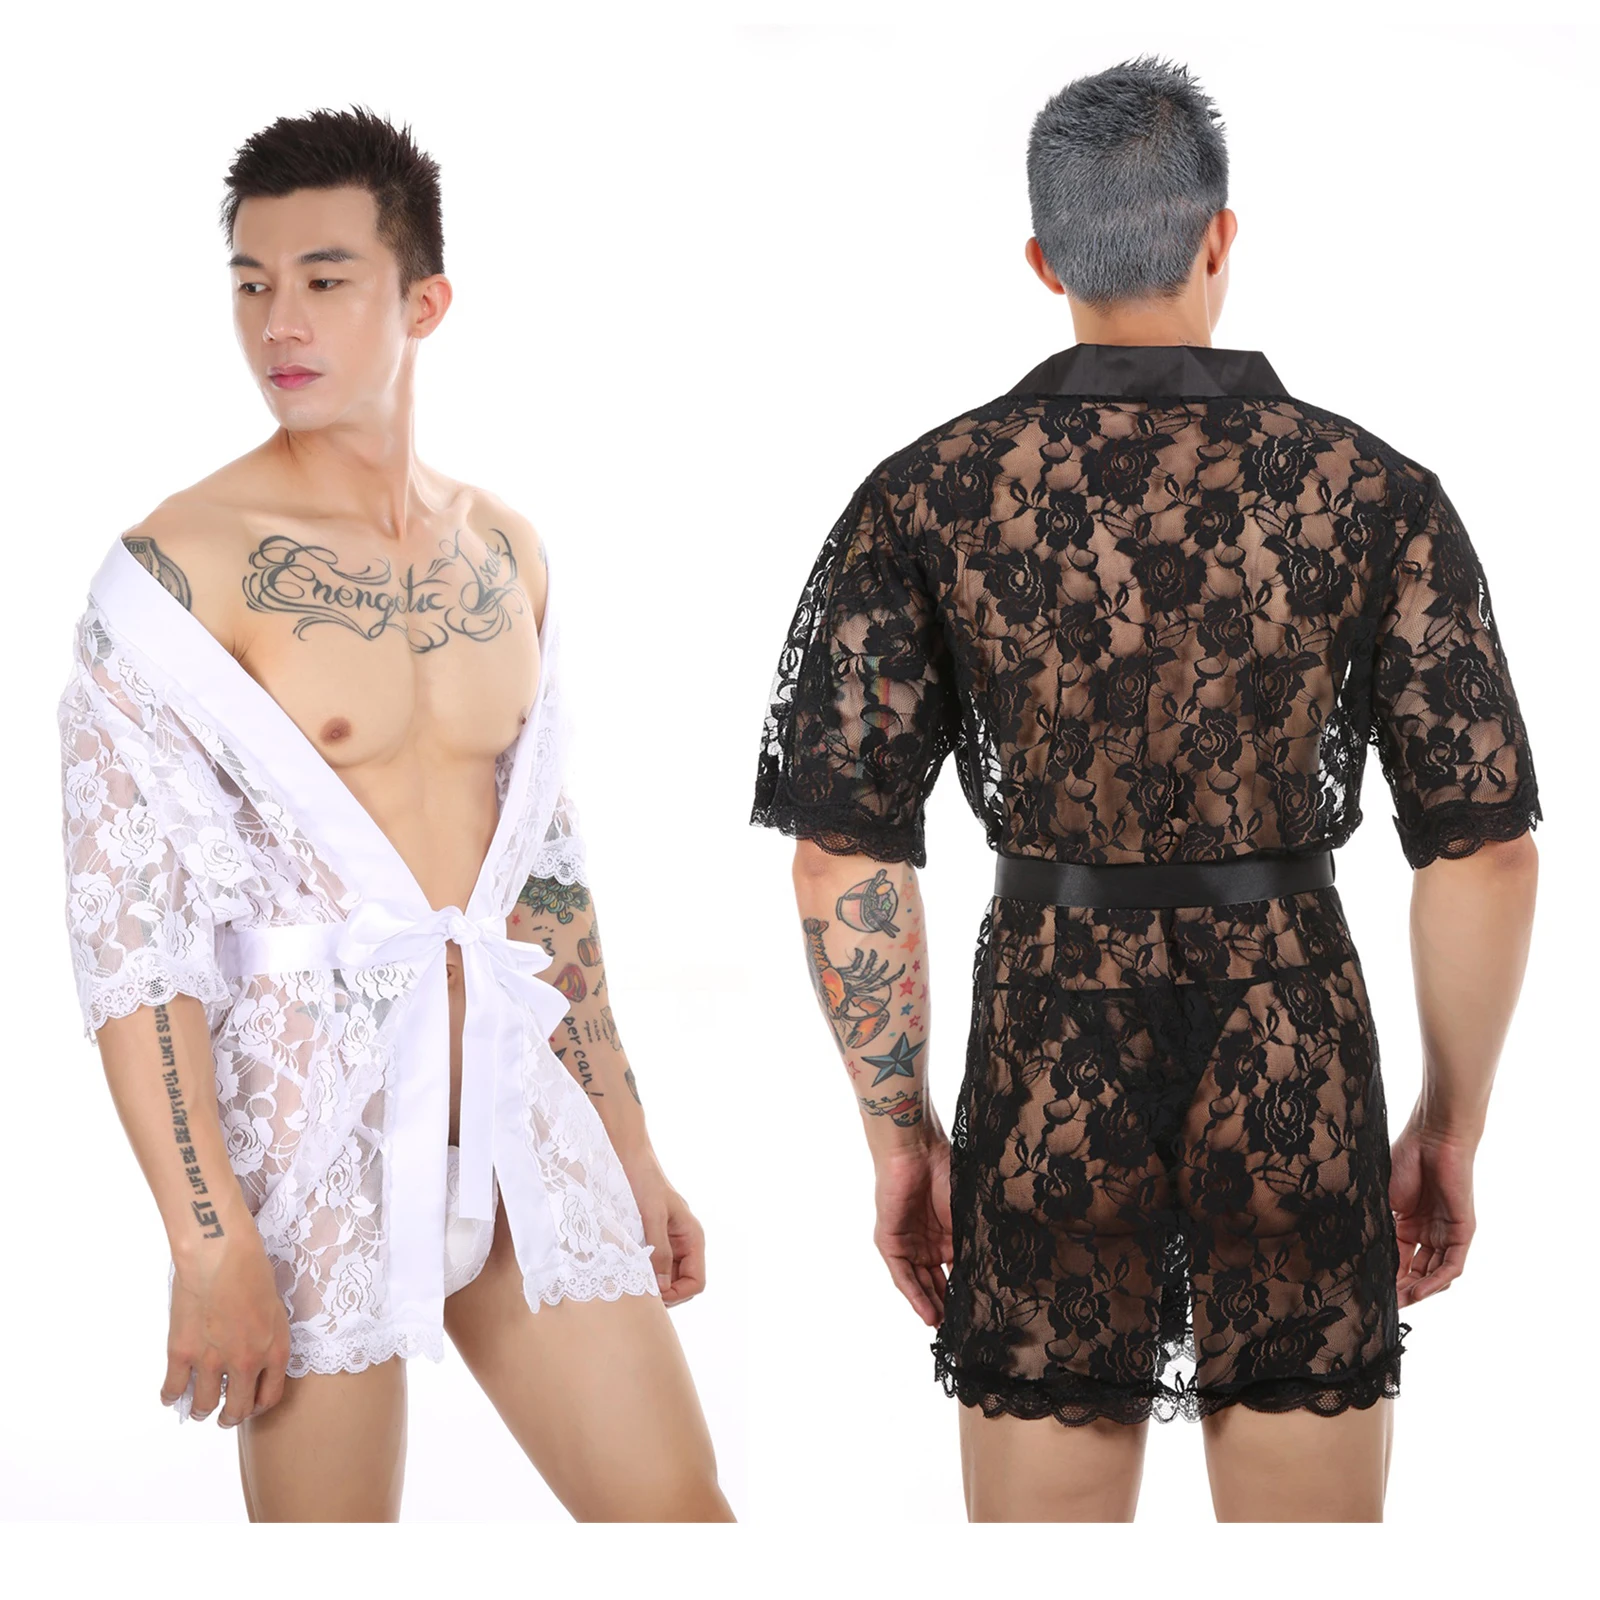 

CLEVER-MENMODE Men's Sexy Skirt See Through Transparent Sleeping Wear Bathrobe Set with Adjustable Thong Exotic Lingerie 2pcs